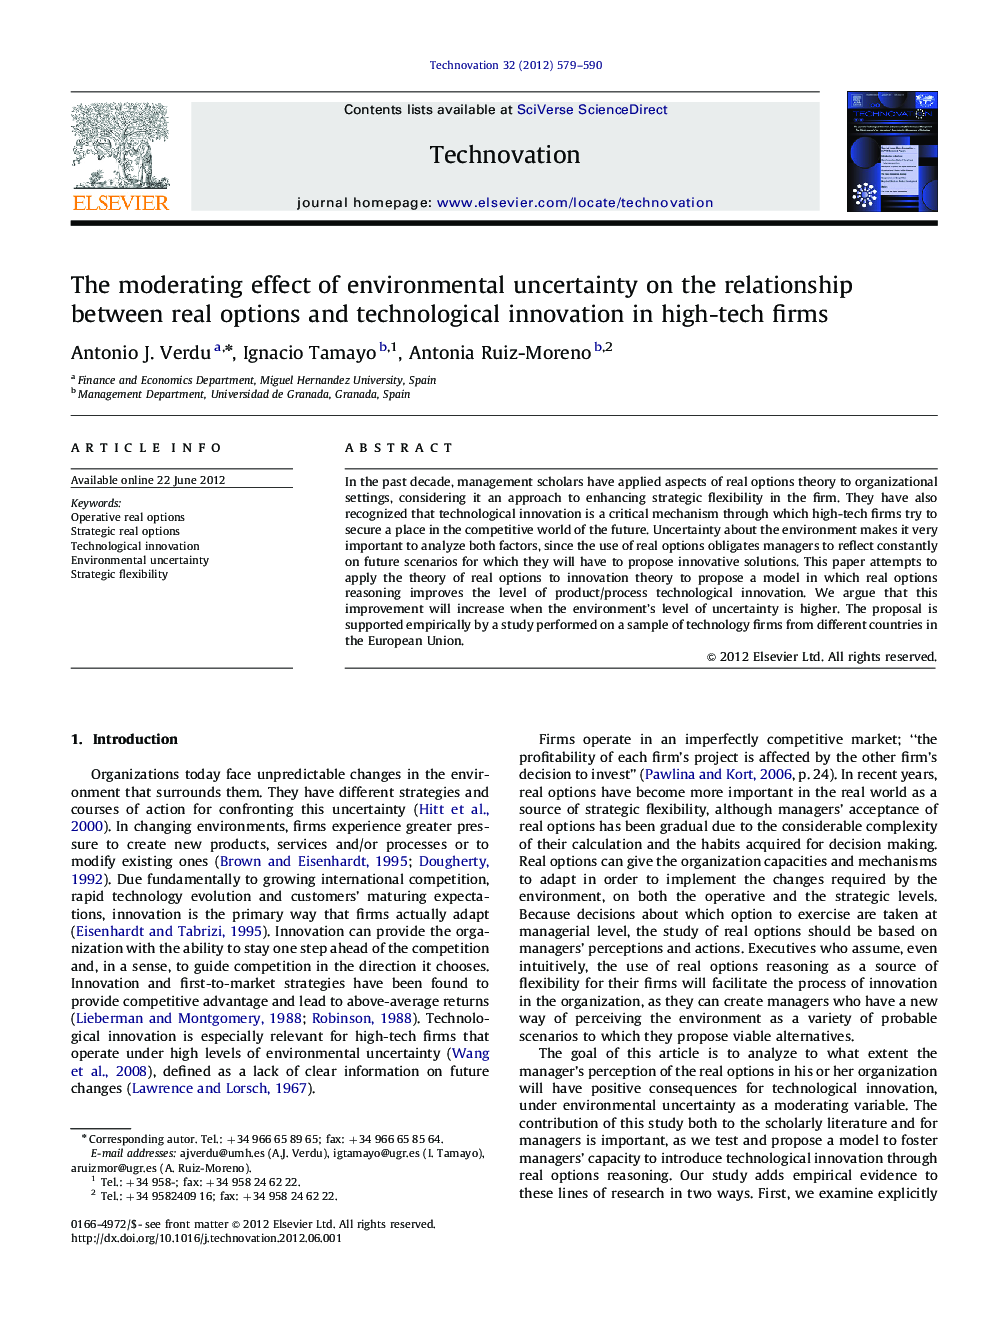 The moderating effect of environmental uncertainty on the relationship between real options and technological innovation in high-tech firms